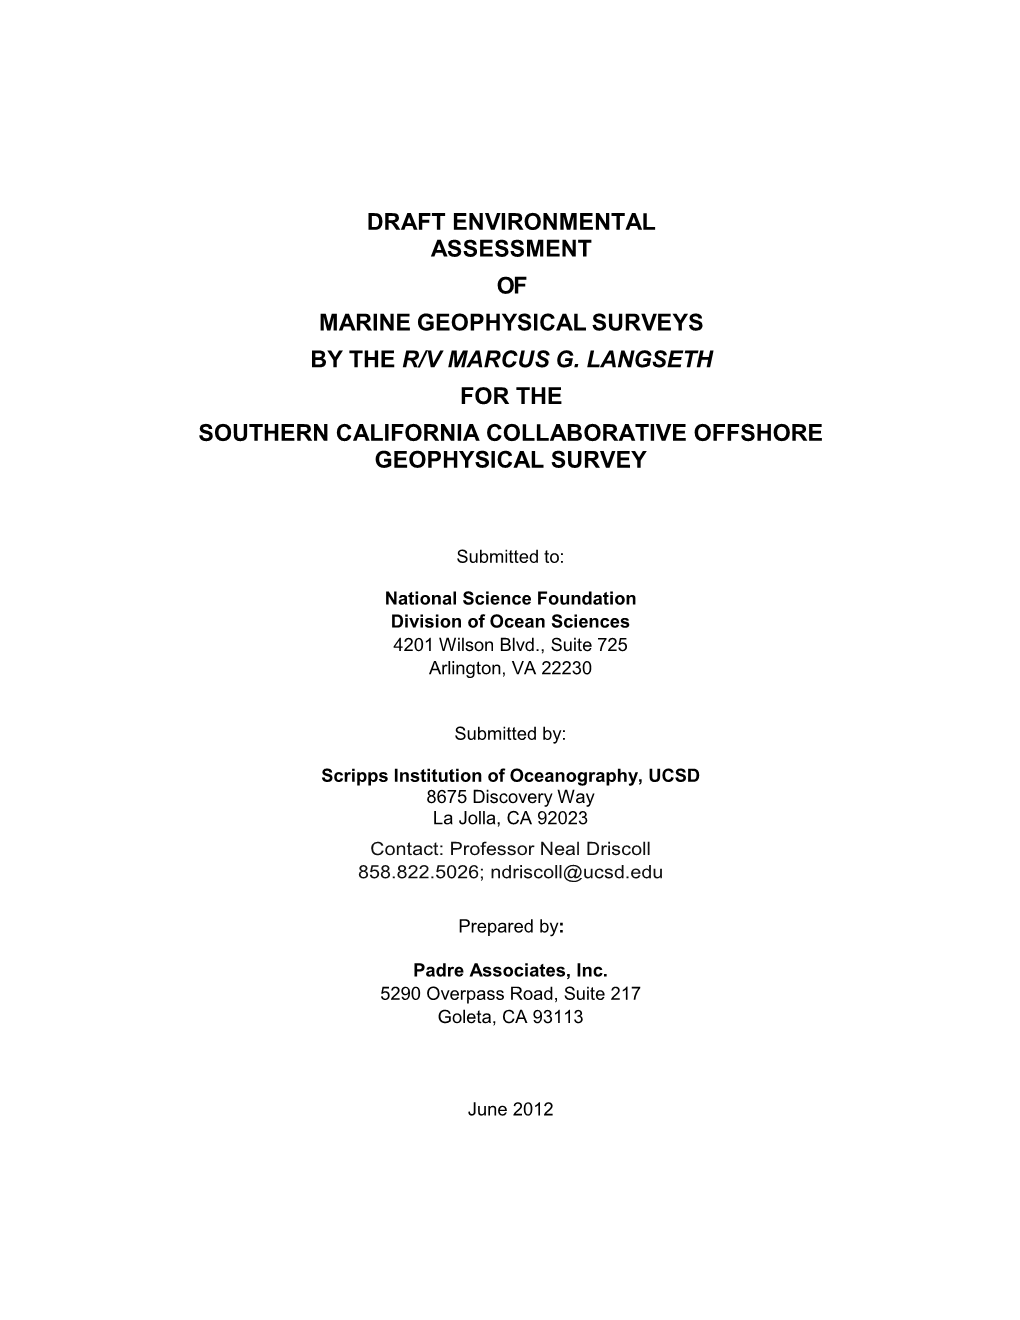 Draft Environmental Assessment of Marine Geophysical Surveys by the R/V Marcus G. Langseth for the Southern California Collaborative Offshore Geophysical Survey